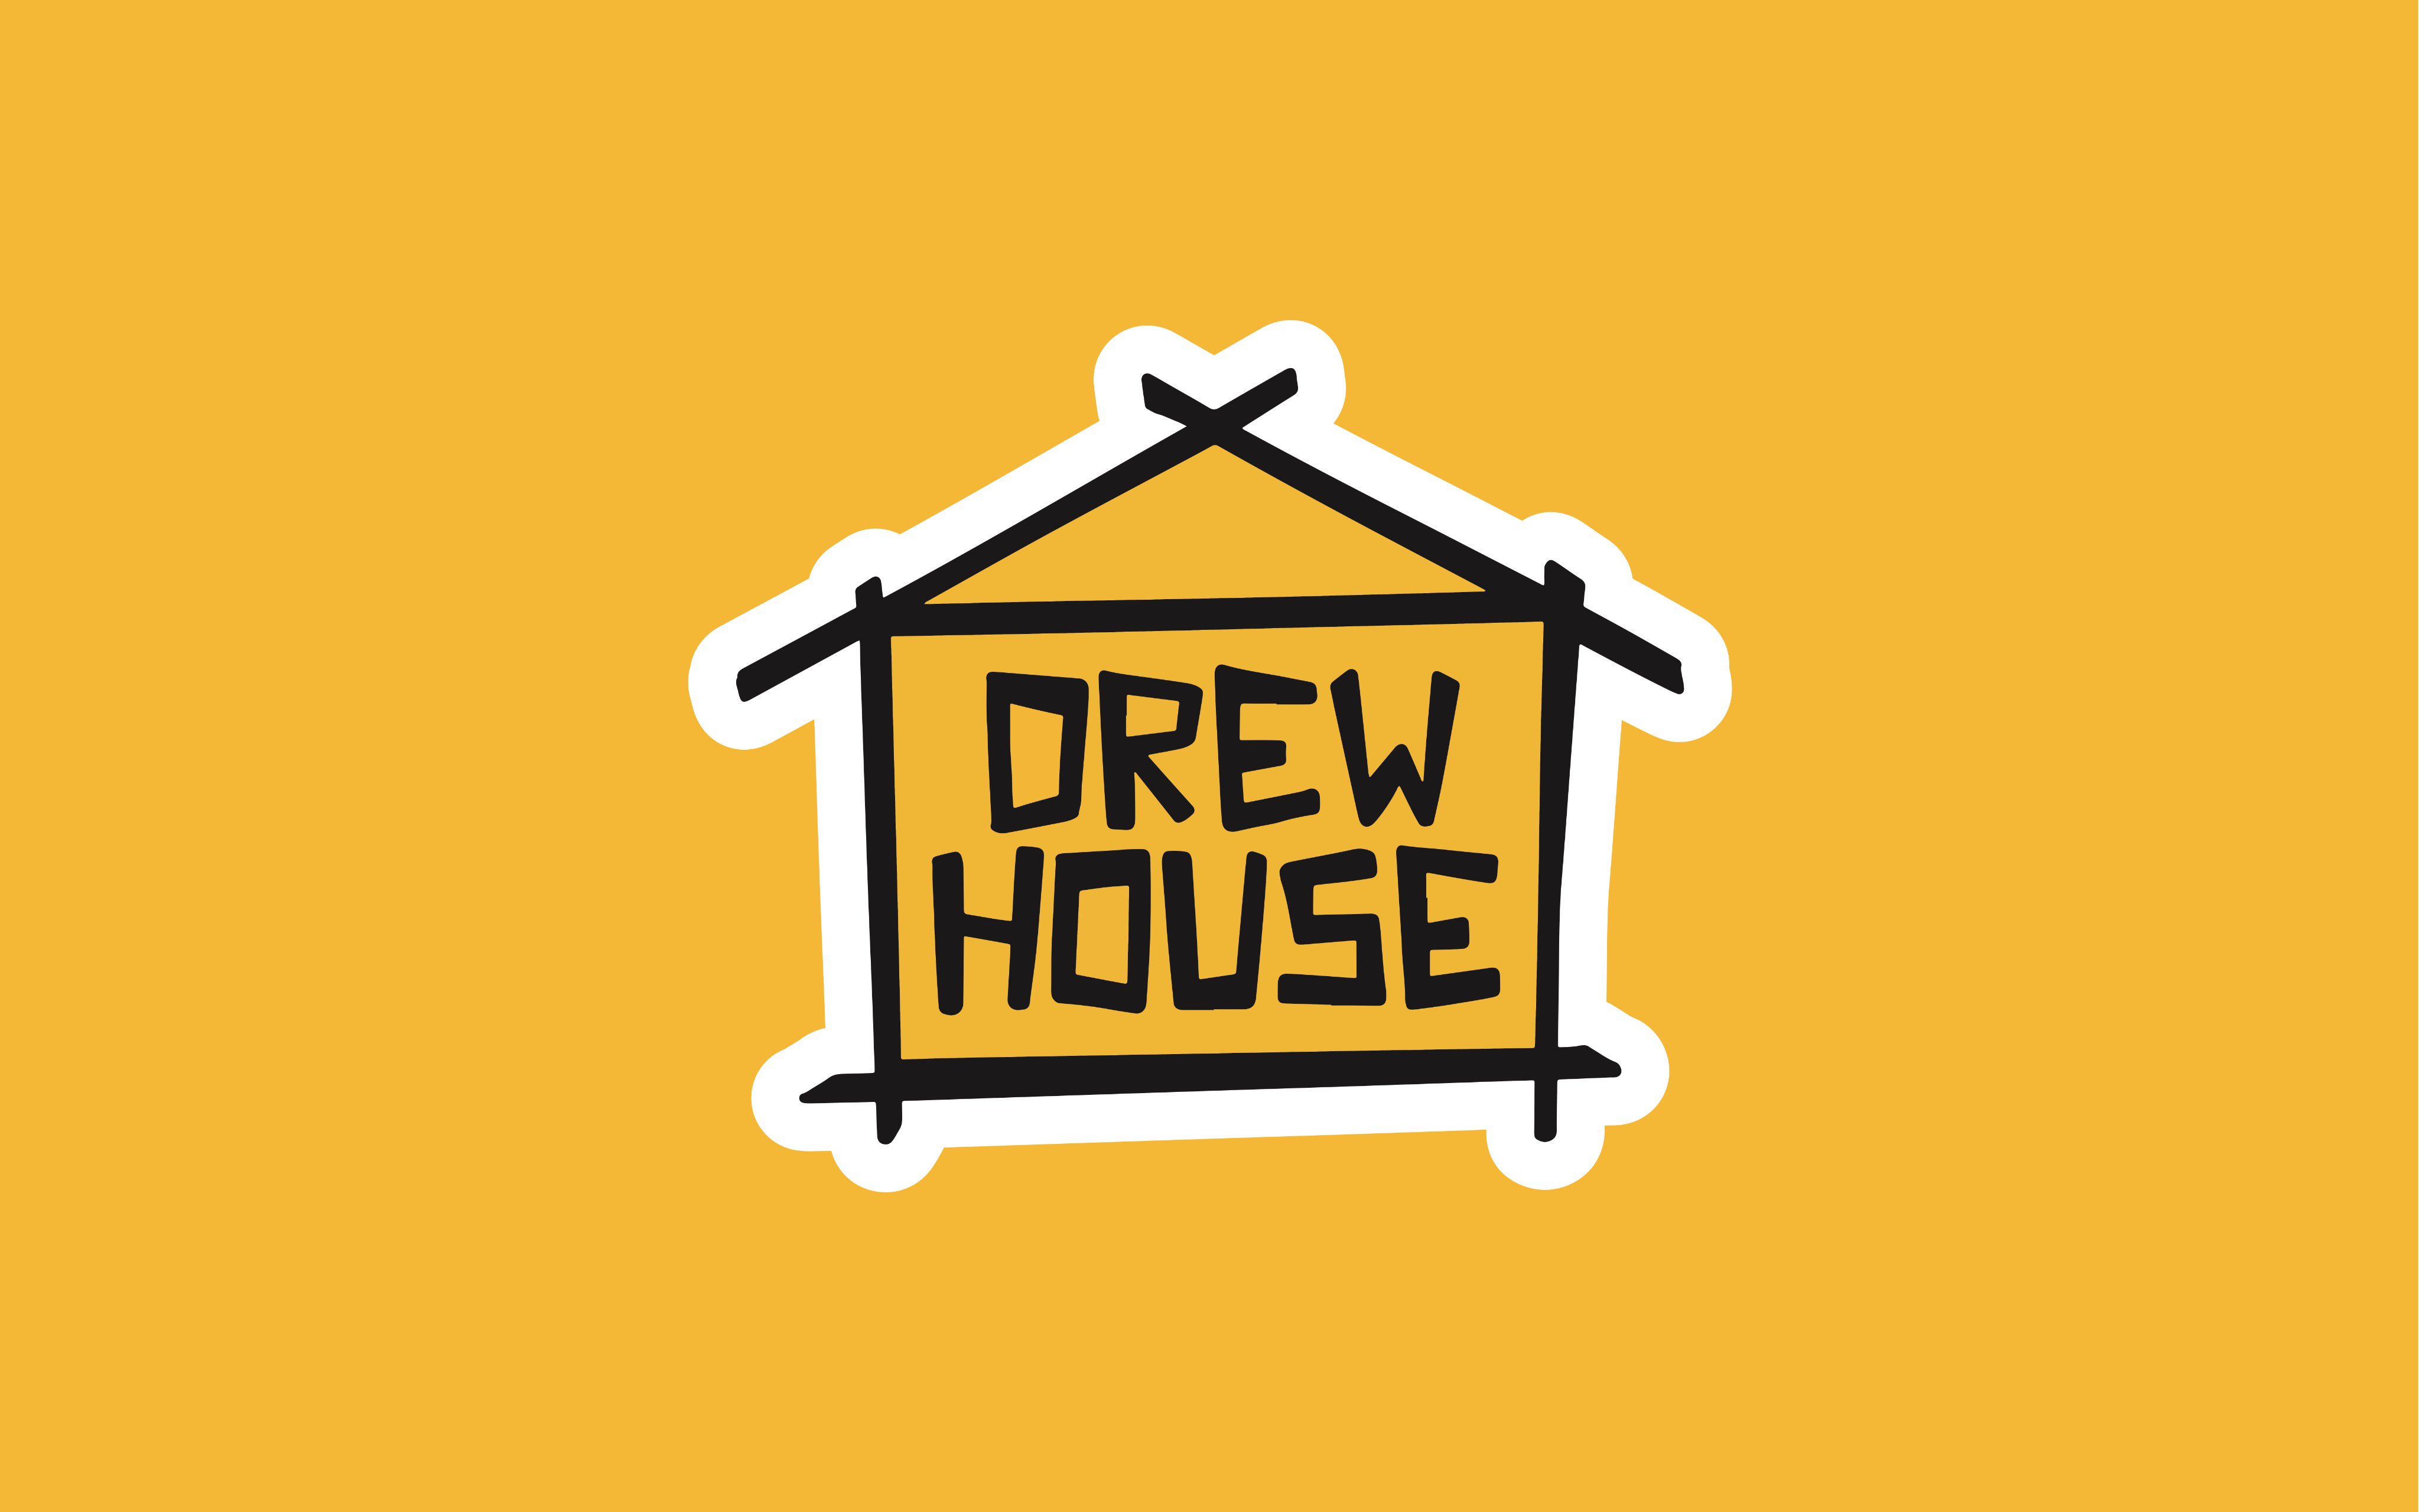 Download Free 100 + drew house Wallpapers